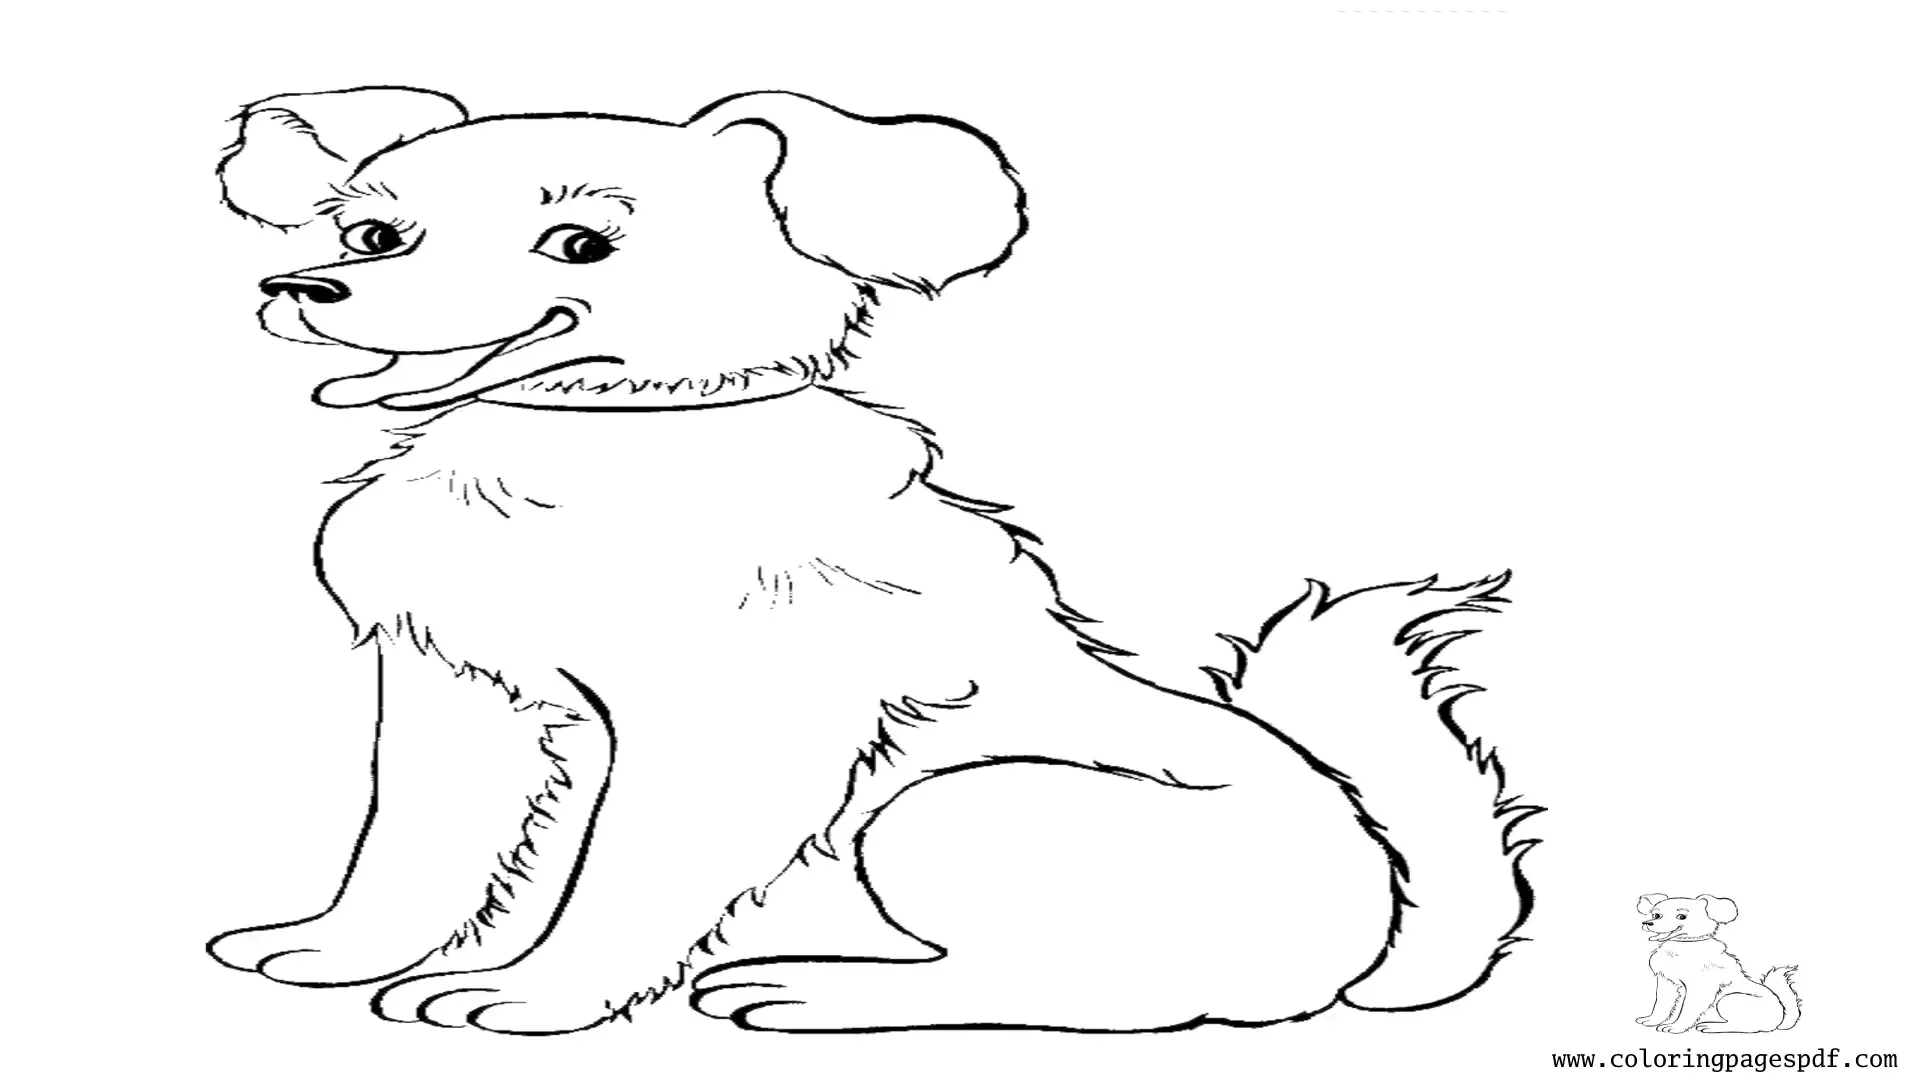 Coloring Page Of A Happy Dog Sitting